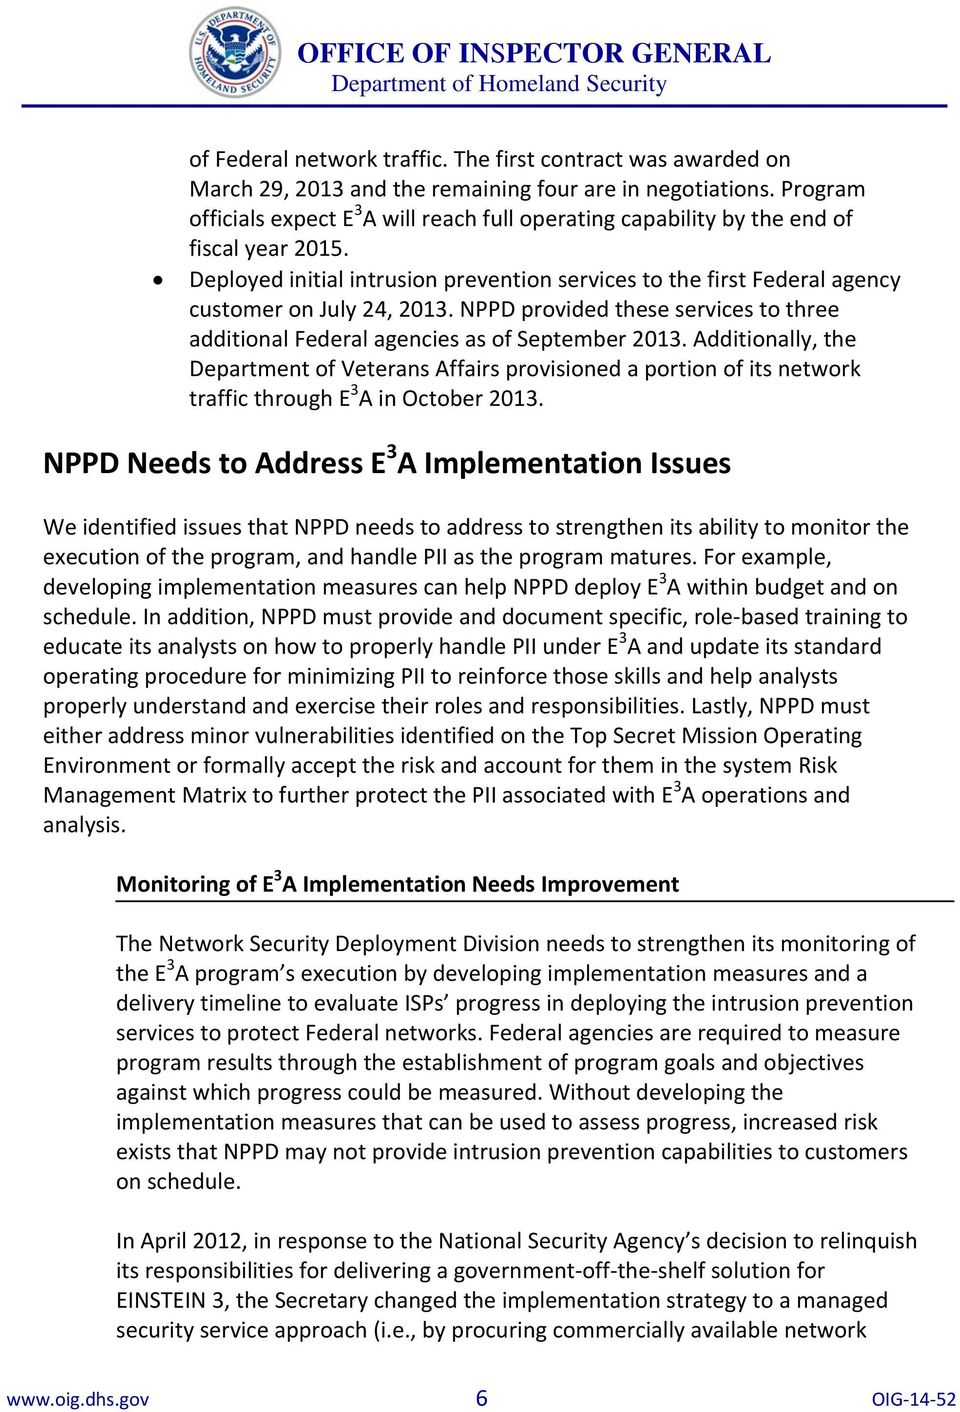 Deployed initial intrusion prevention services to the first Federal agency customer on July 24, 2013. NPPD provided these services to three additional Federal agencies as of September 2013.